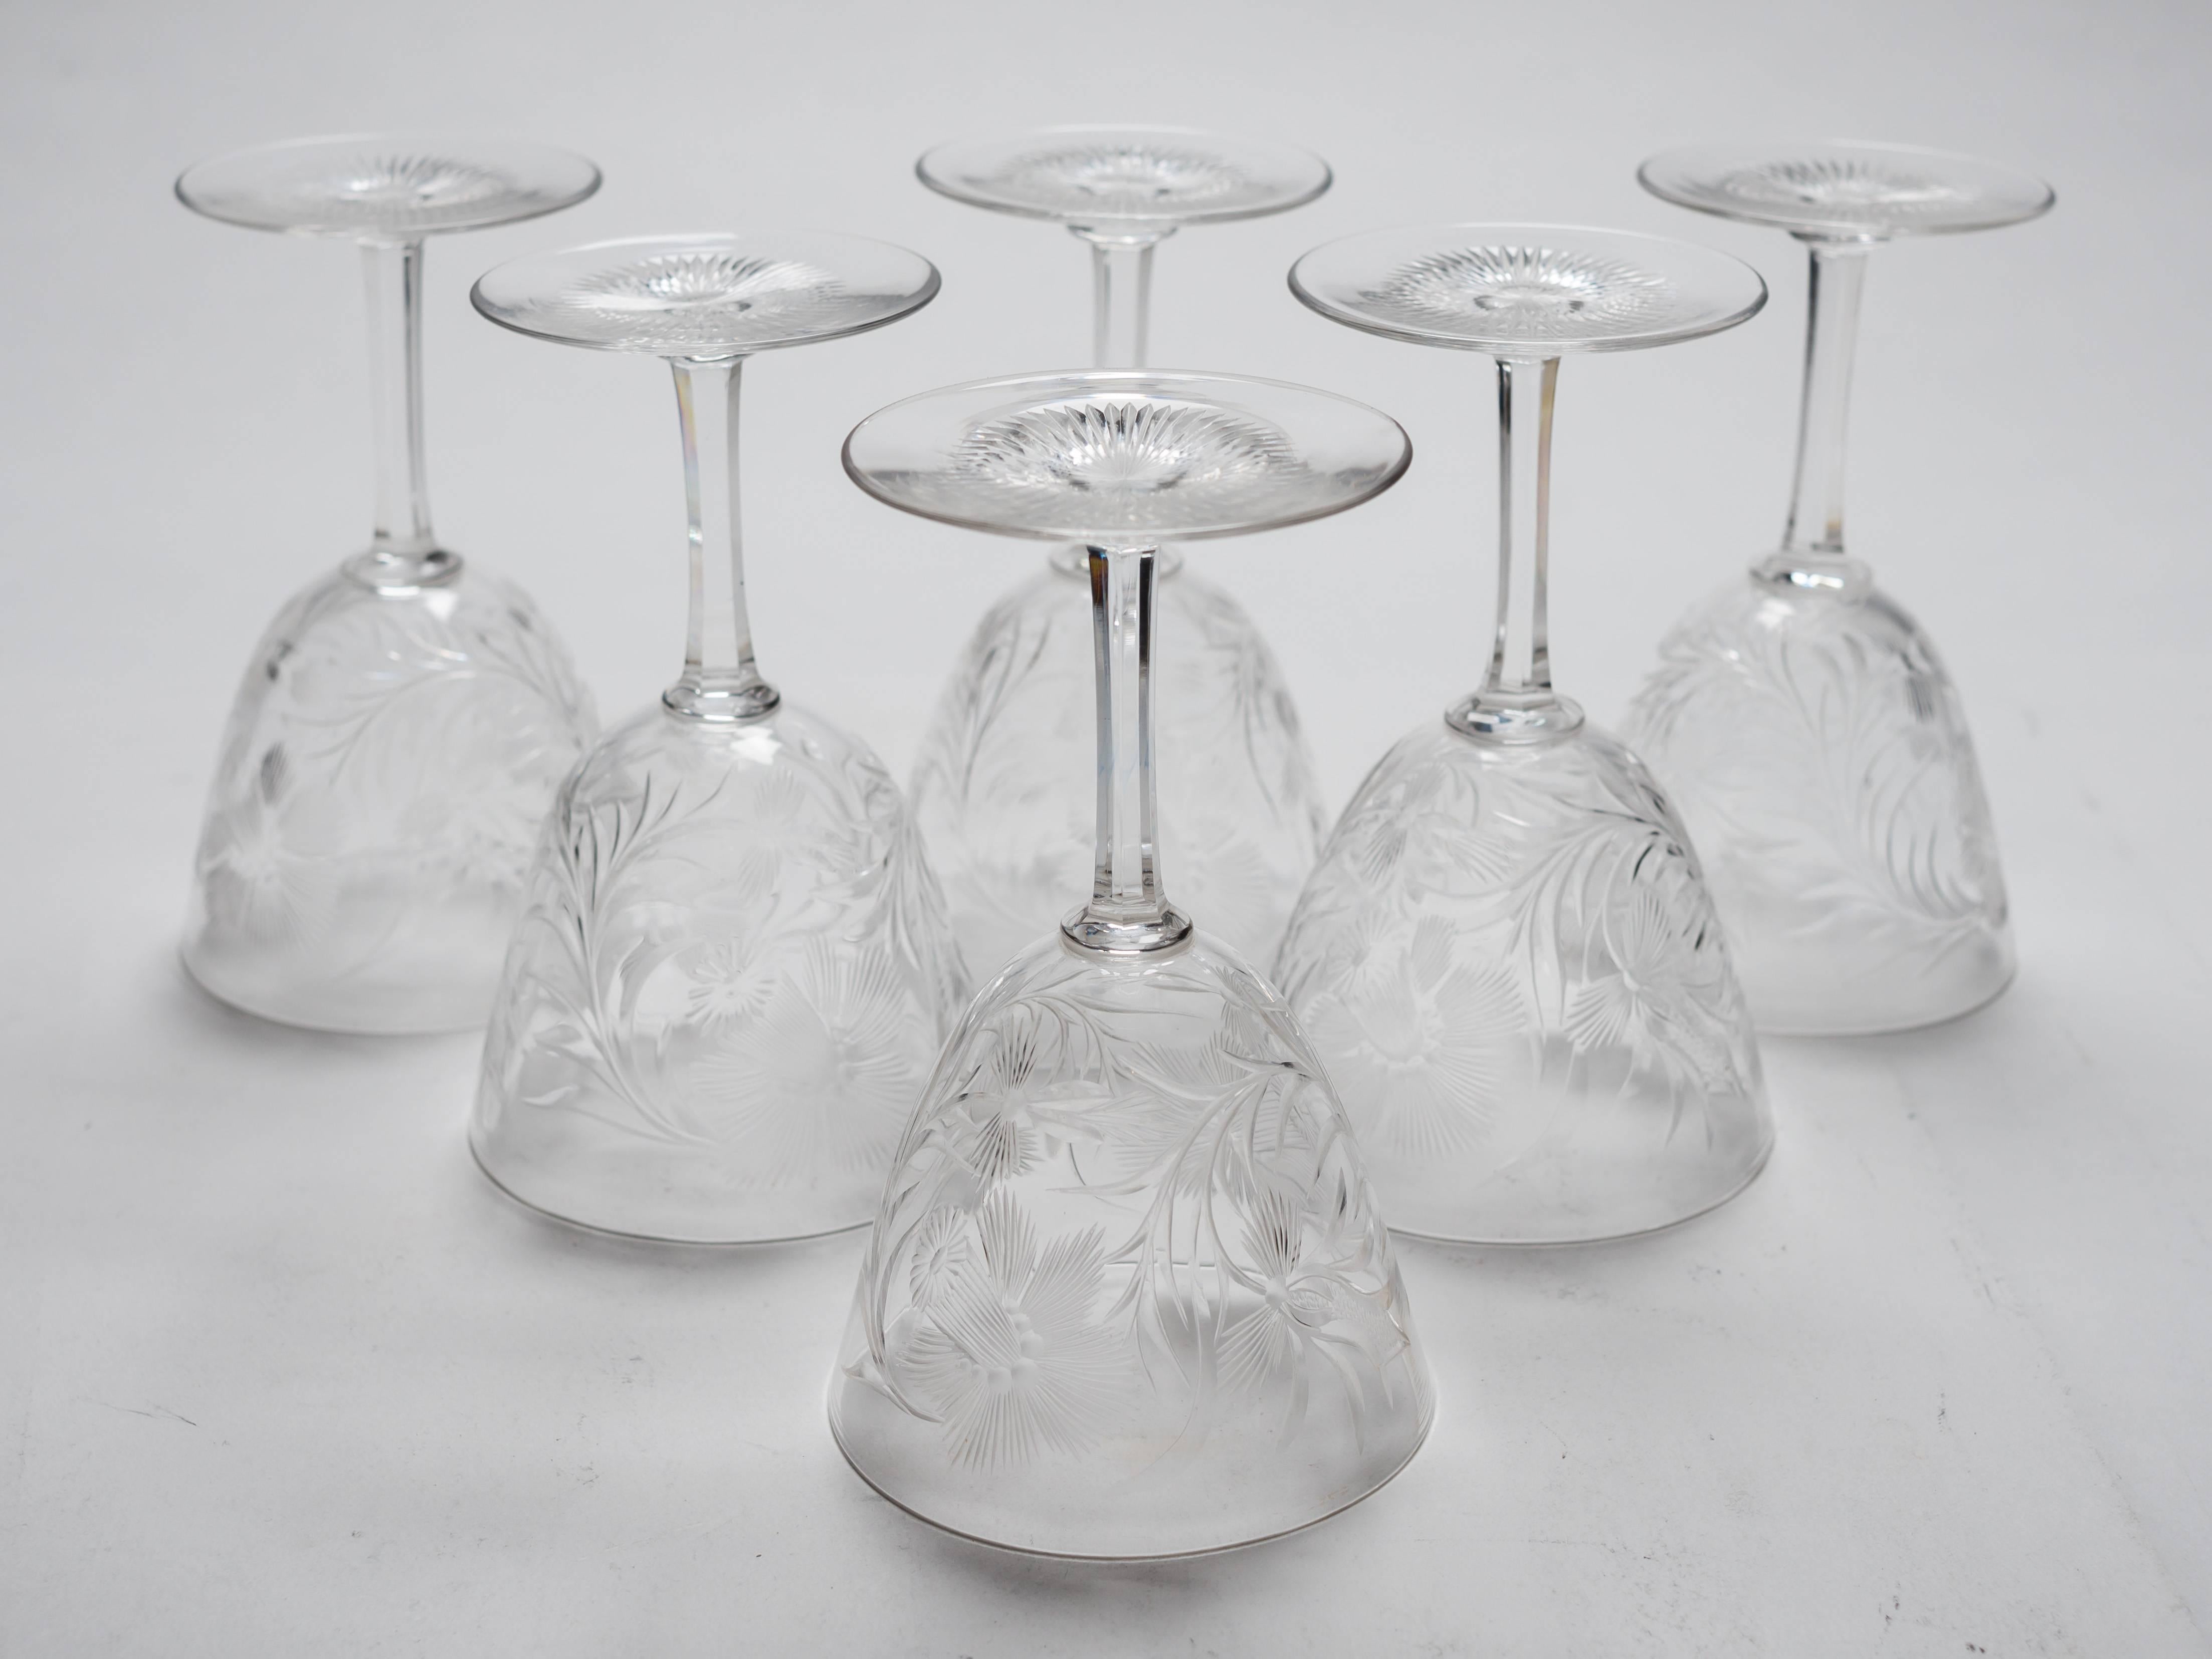 A beautiful English Edwardian set of six wine glasses with lovely intaglio flower cut-glass decoration and plain stems, circa 1905.

Total weight 558g.

